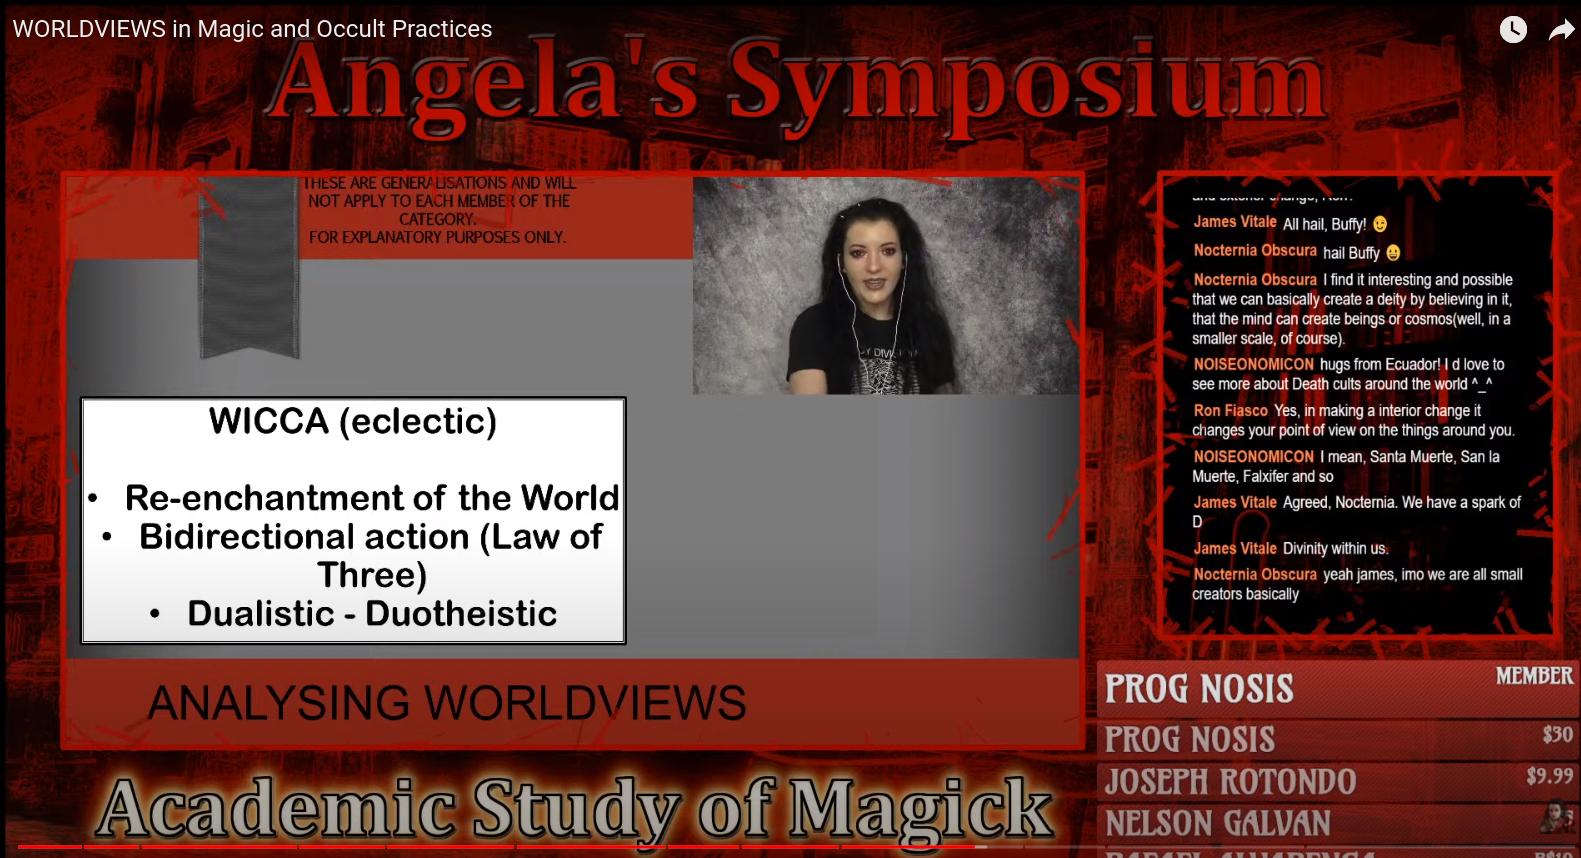 WORLDVIEWS in Magic and Occult Practices